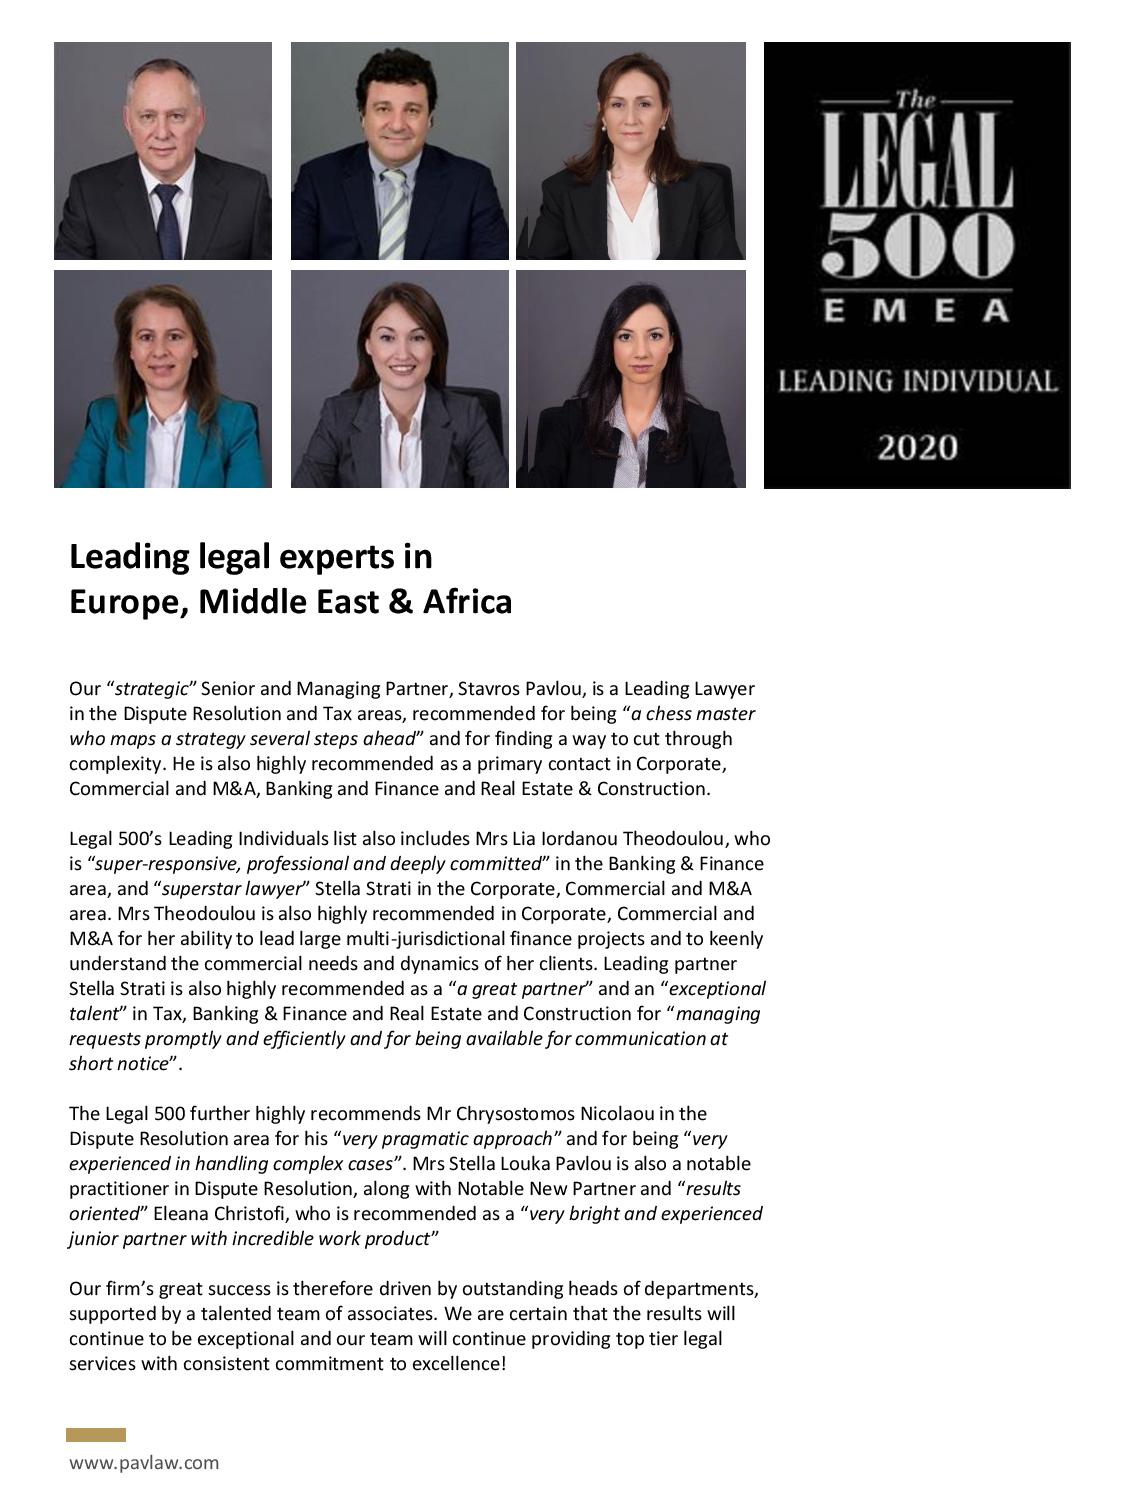 Patrikios Pavlou & Associates LLC: The Legal 500 - Leading legal experts in Europe, Middle East & Africa